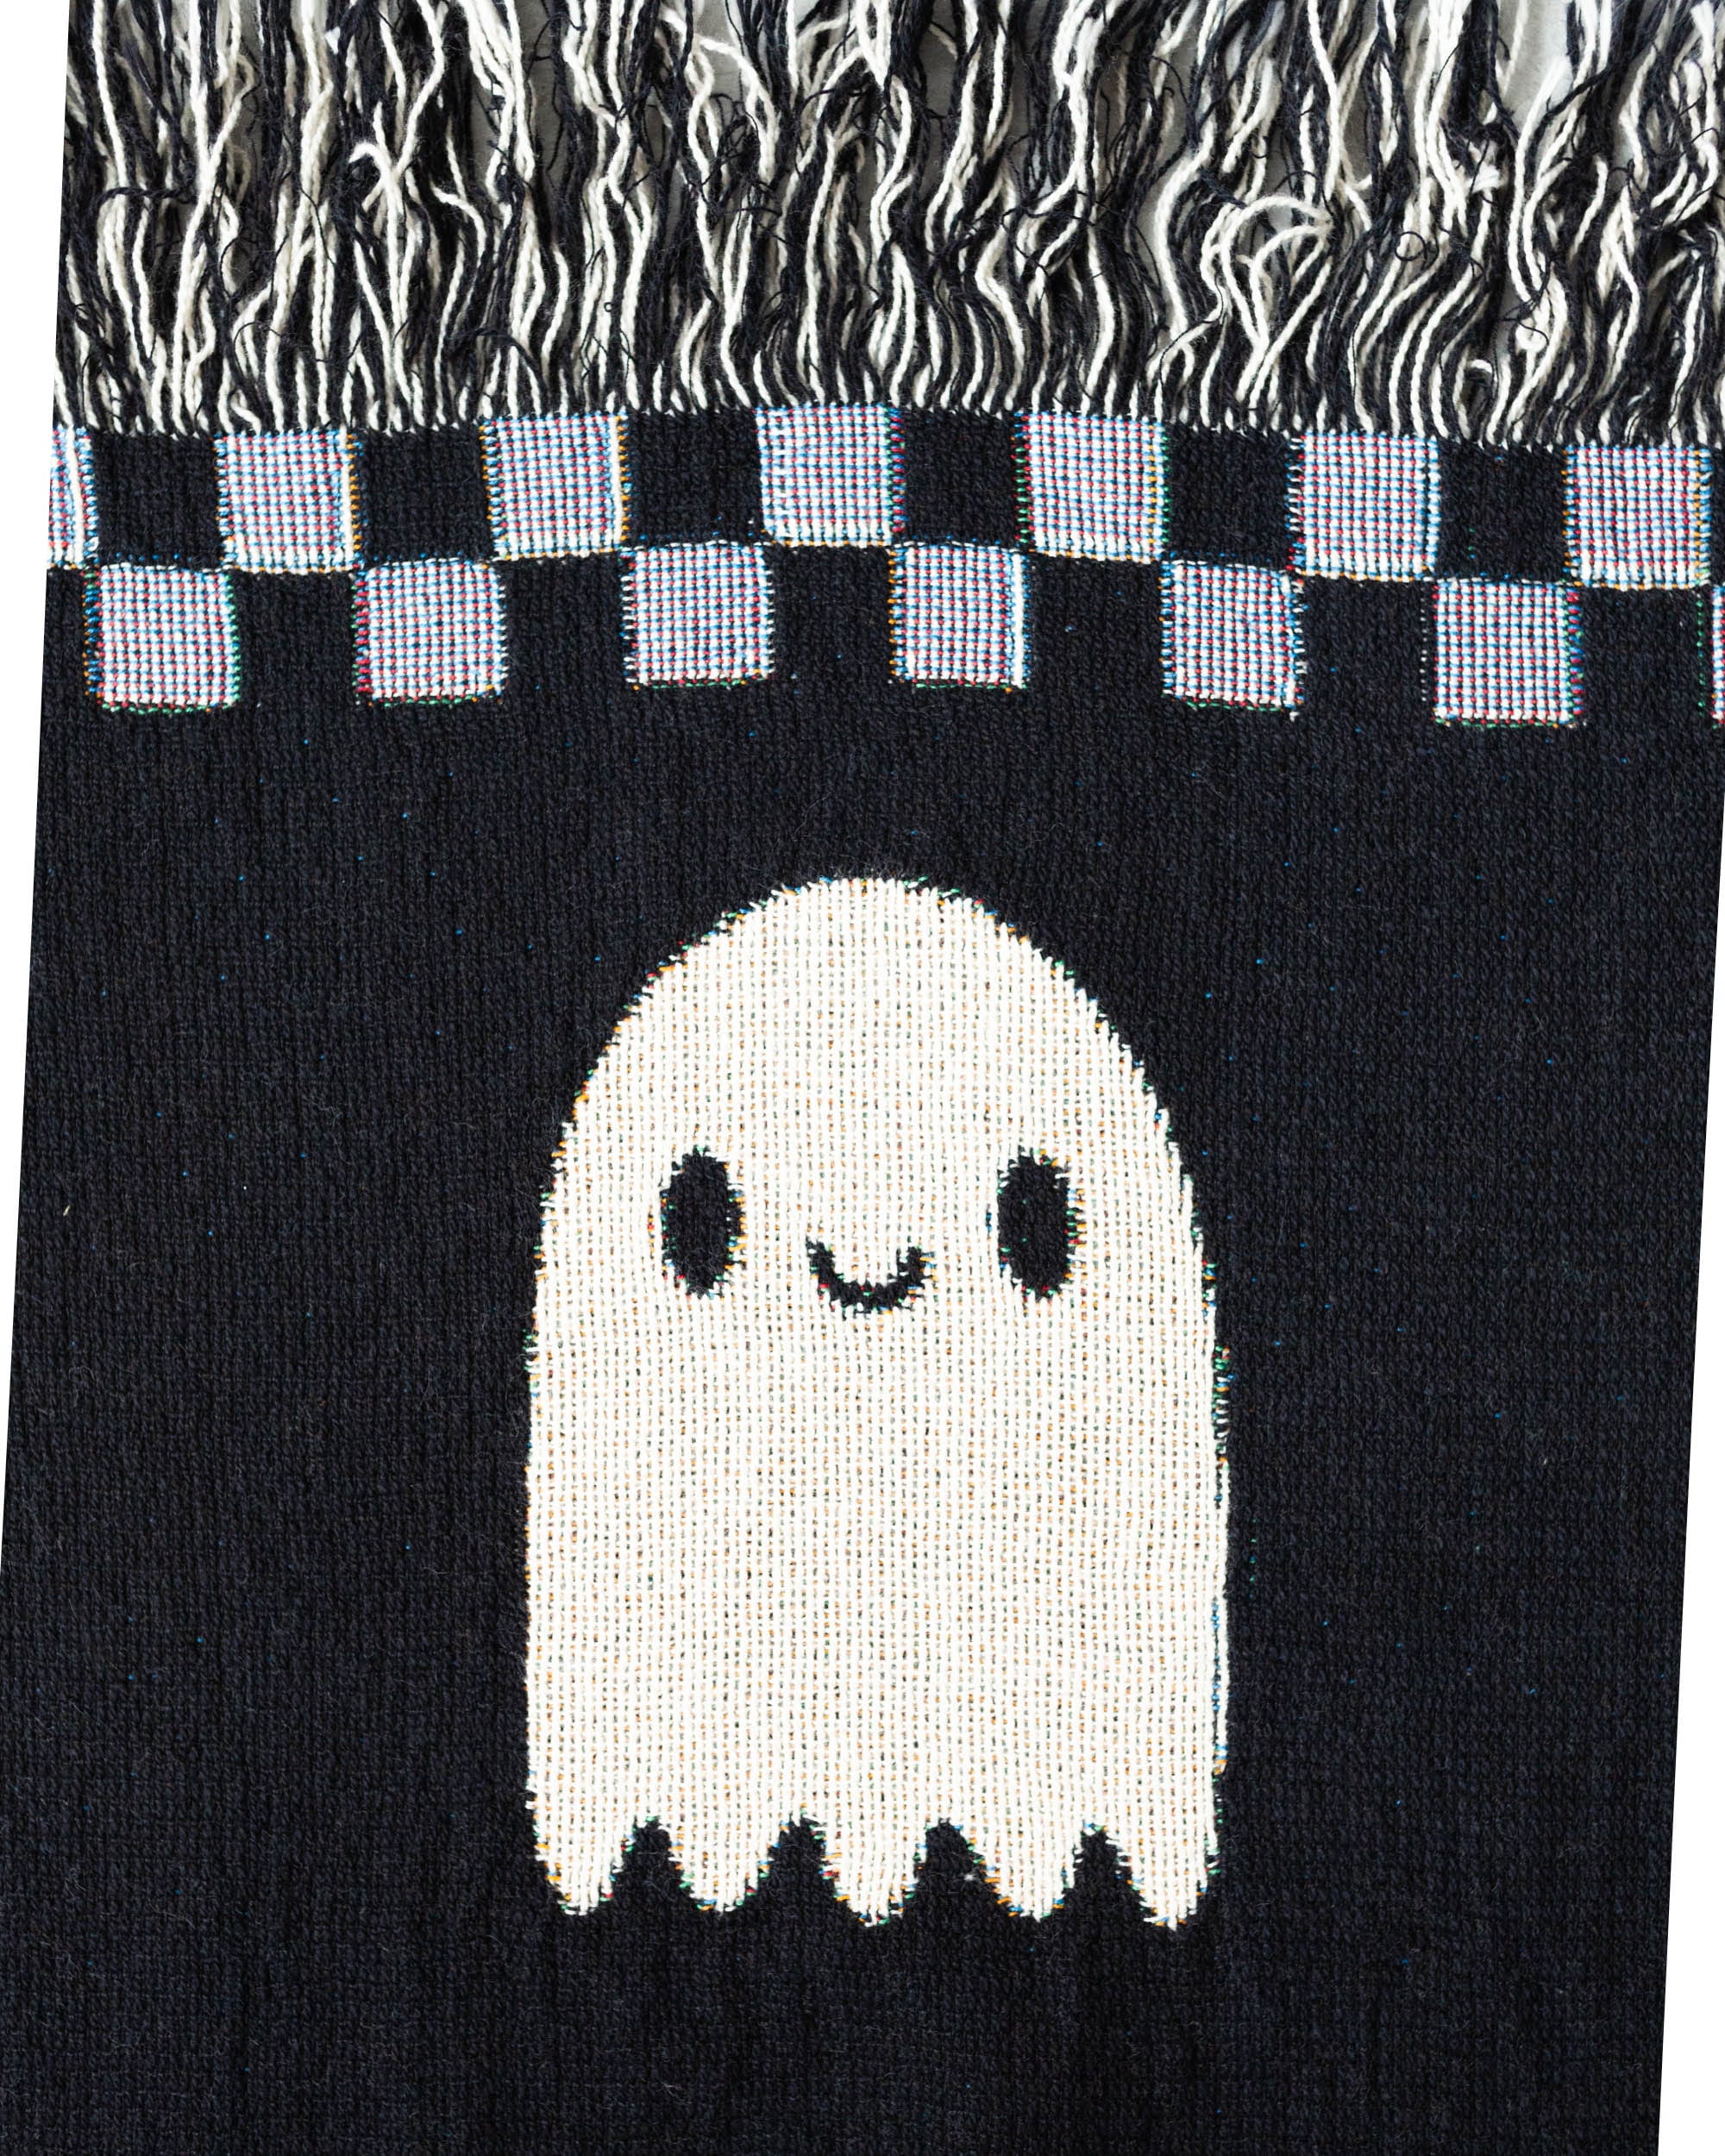 Ghosts Throw Blanket